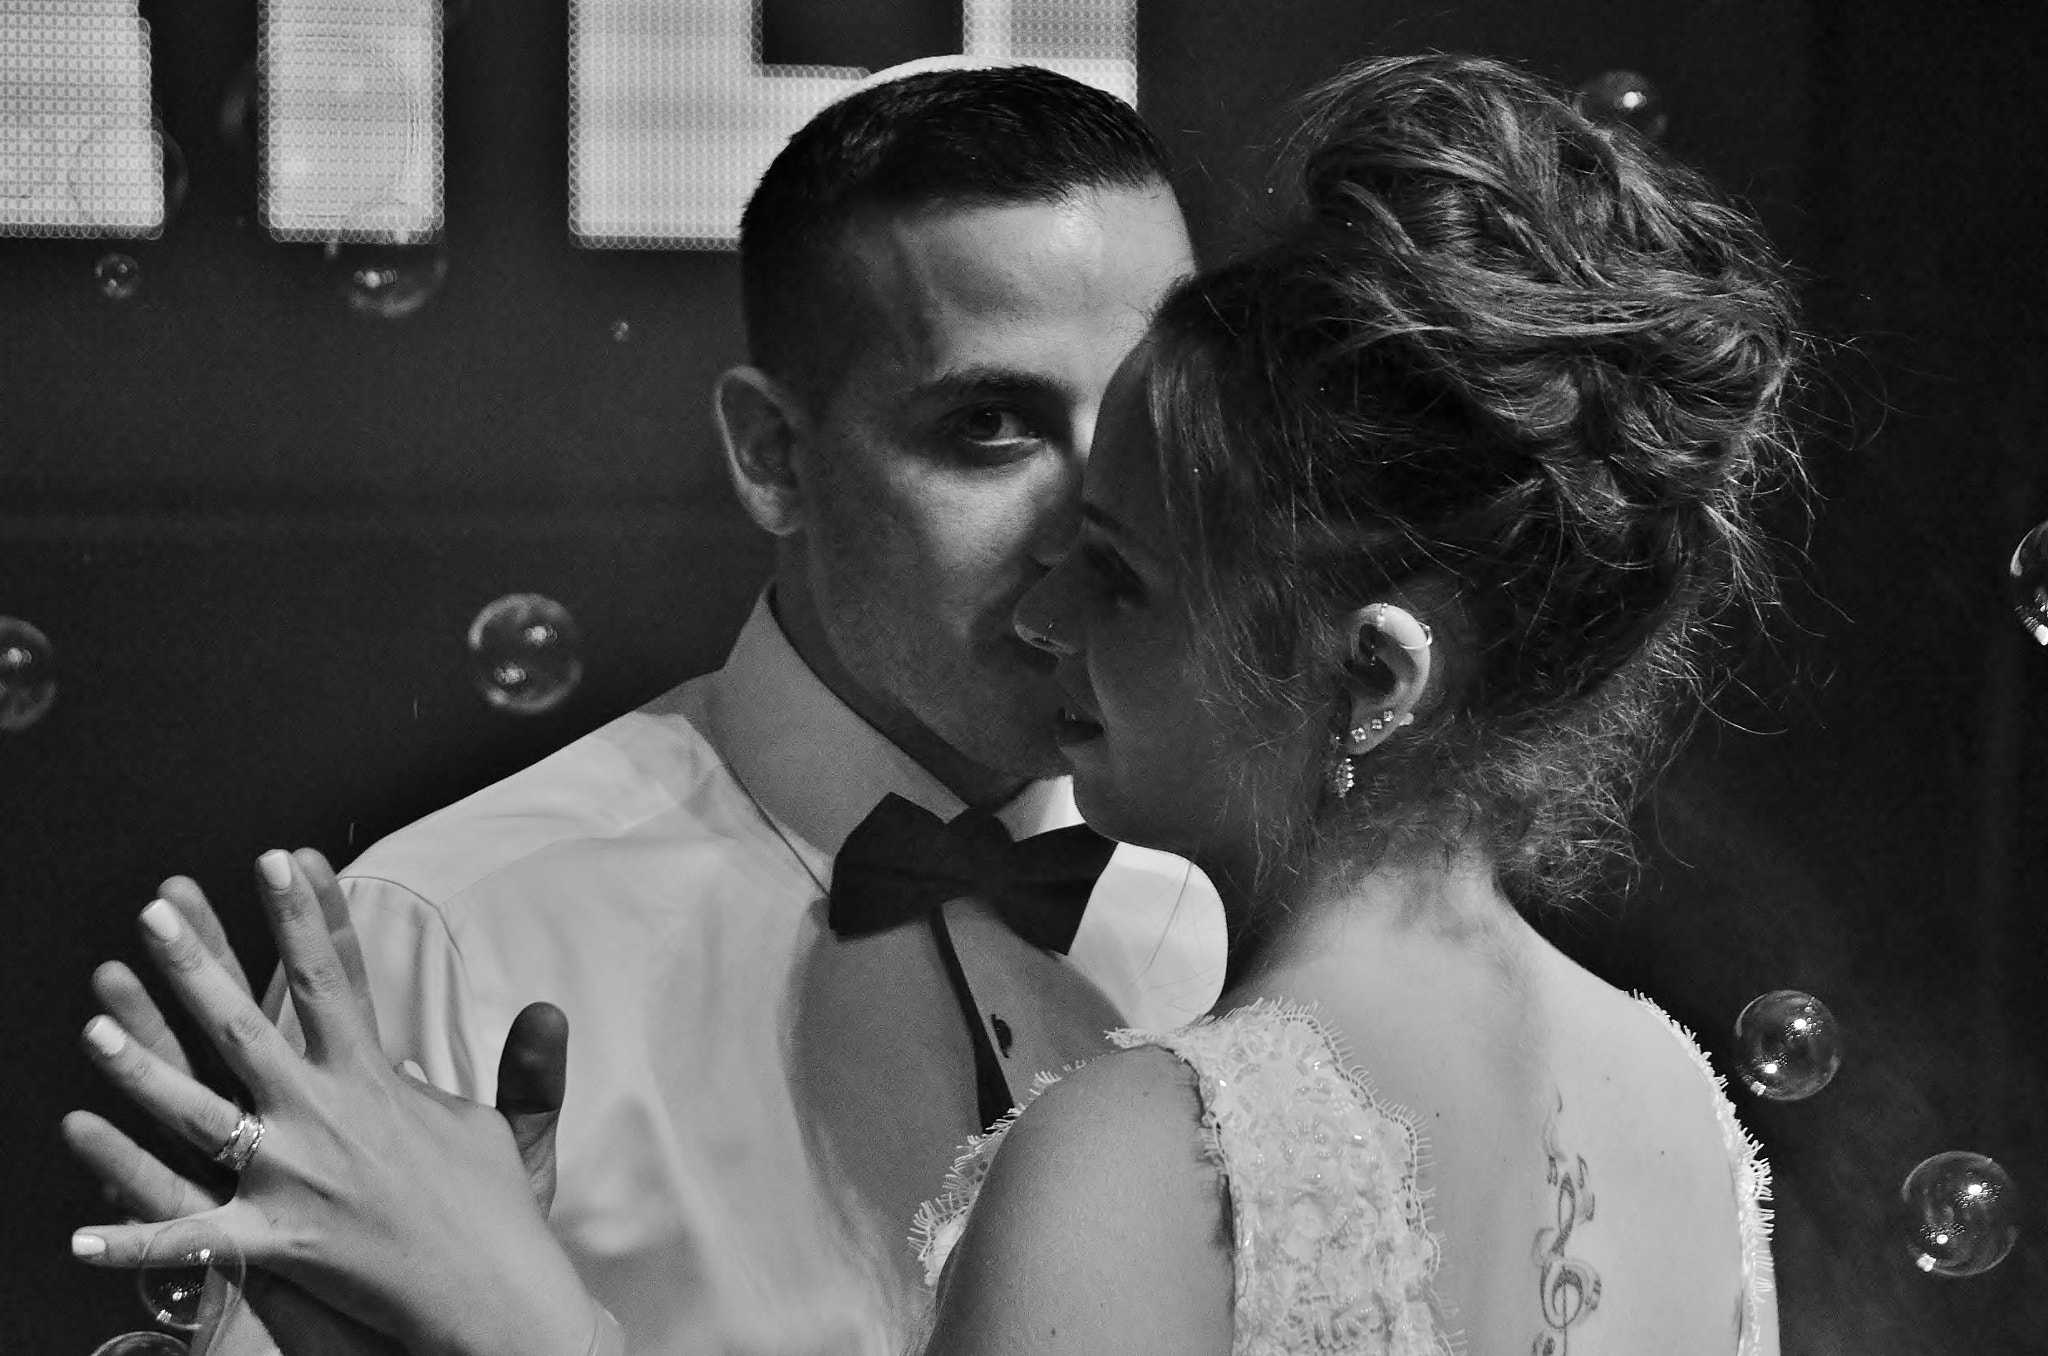 Nikon D7000 sample photo. The first dathe first dance partnernce partner photography